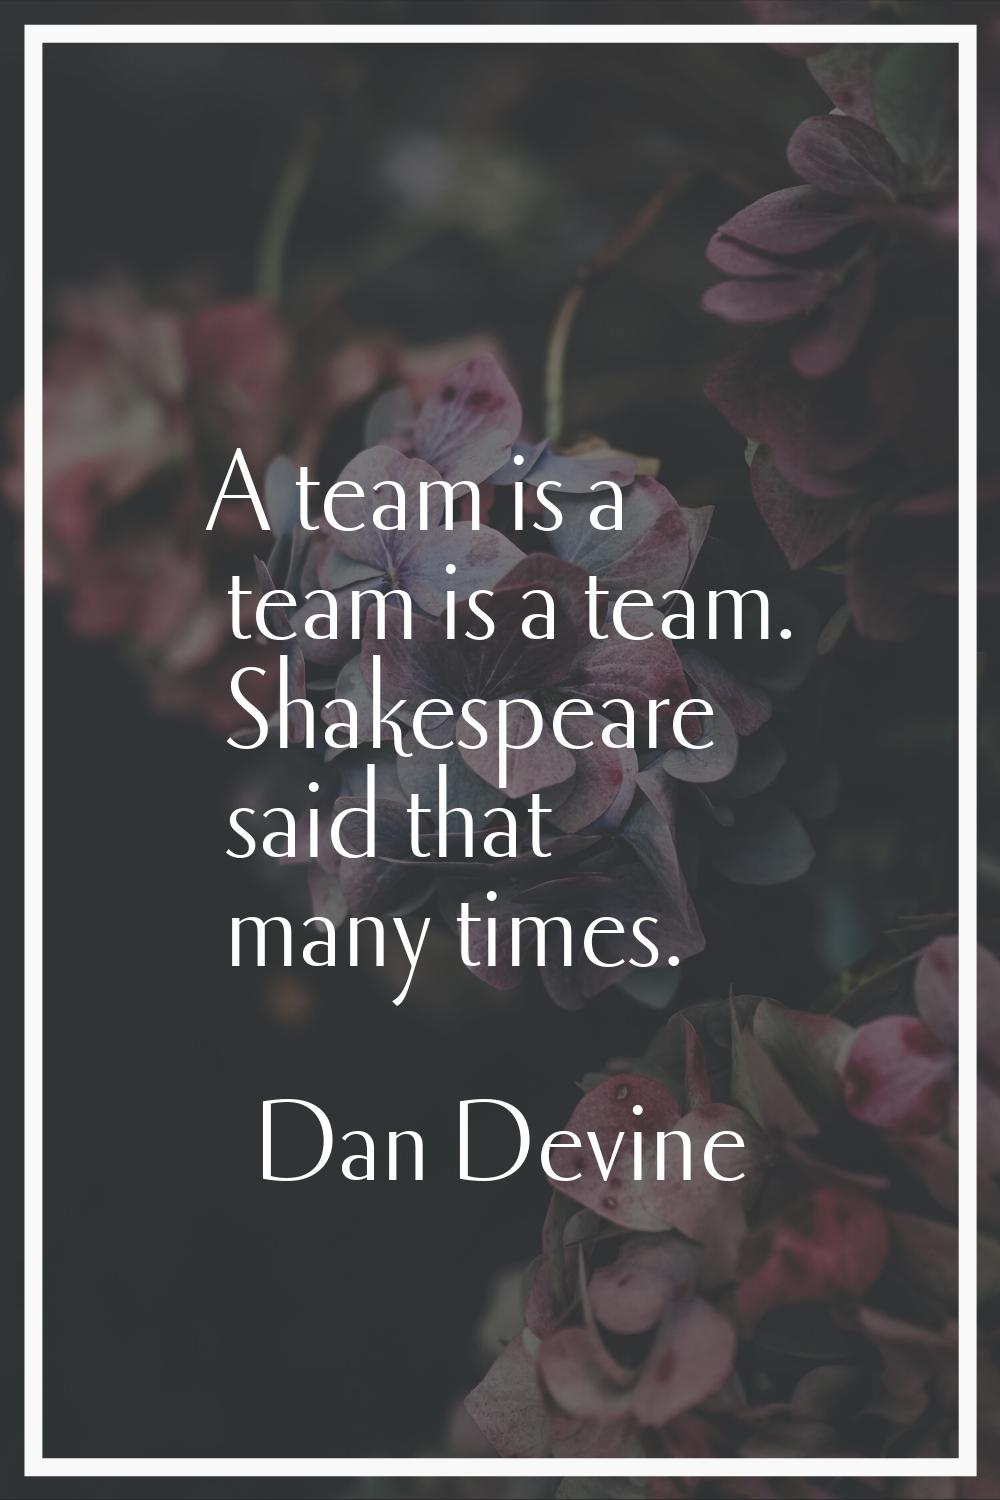 A team is a team is a team. Shakespeare said that many times.